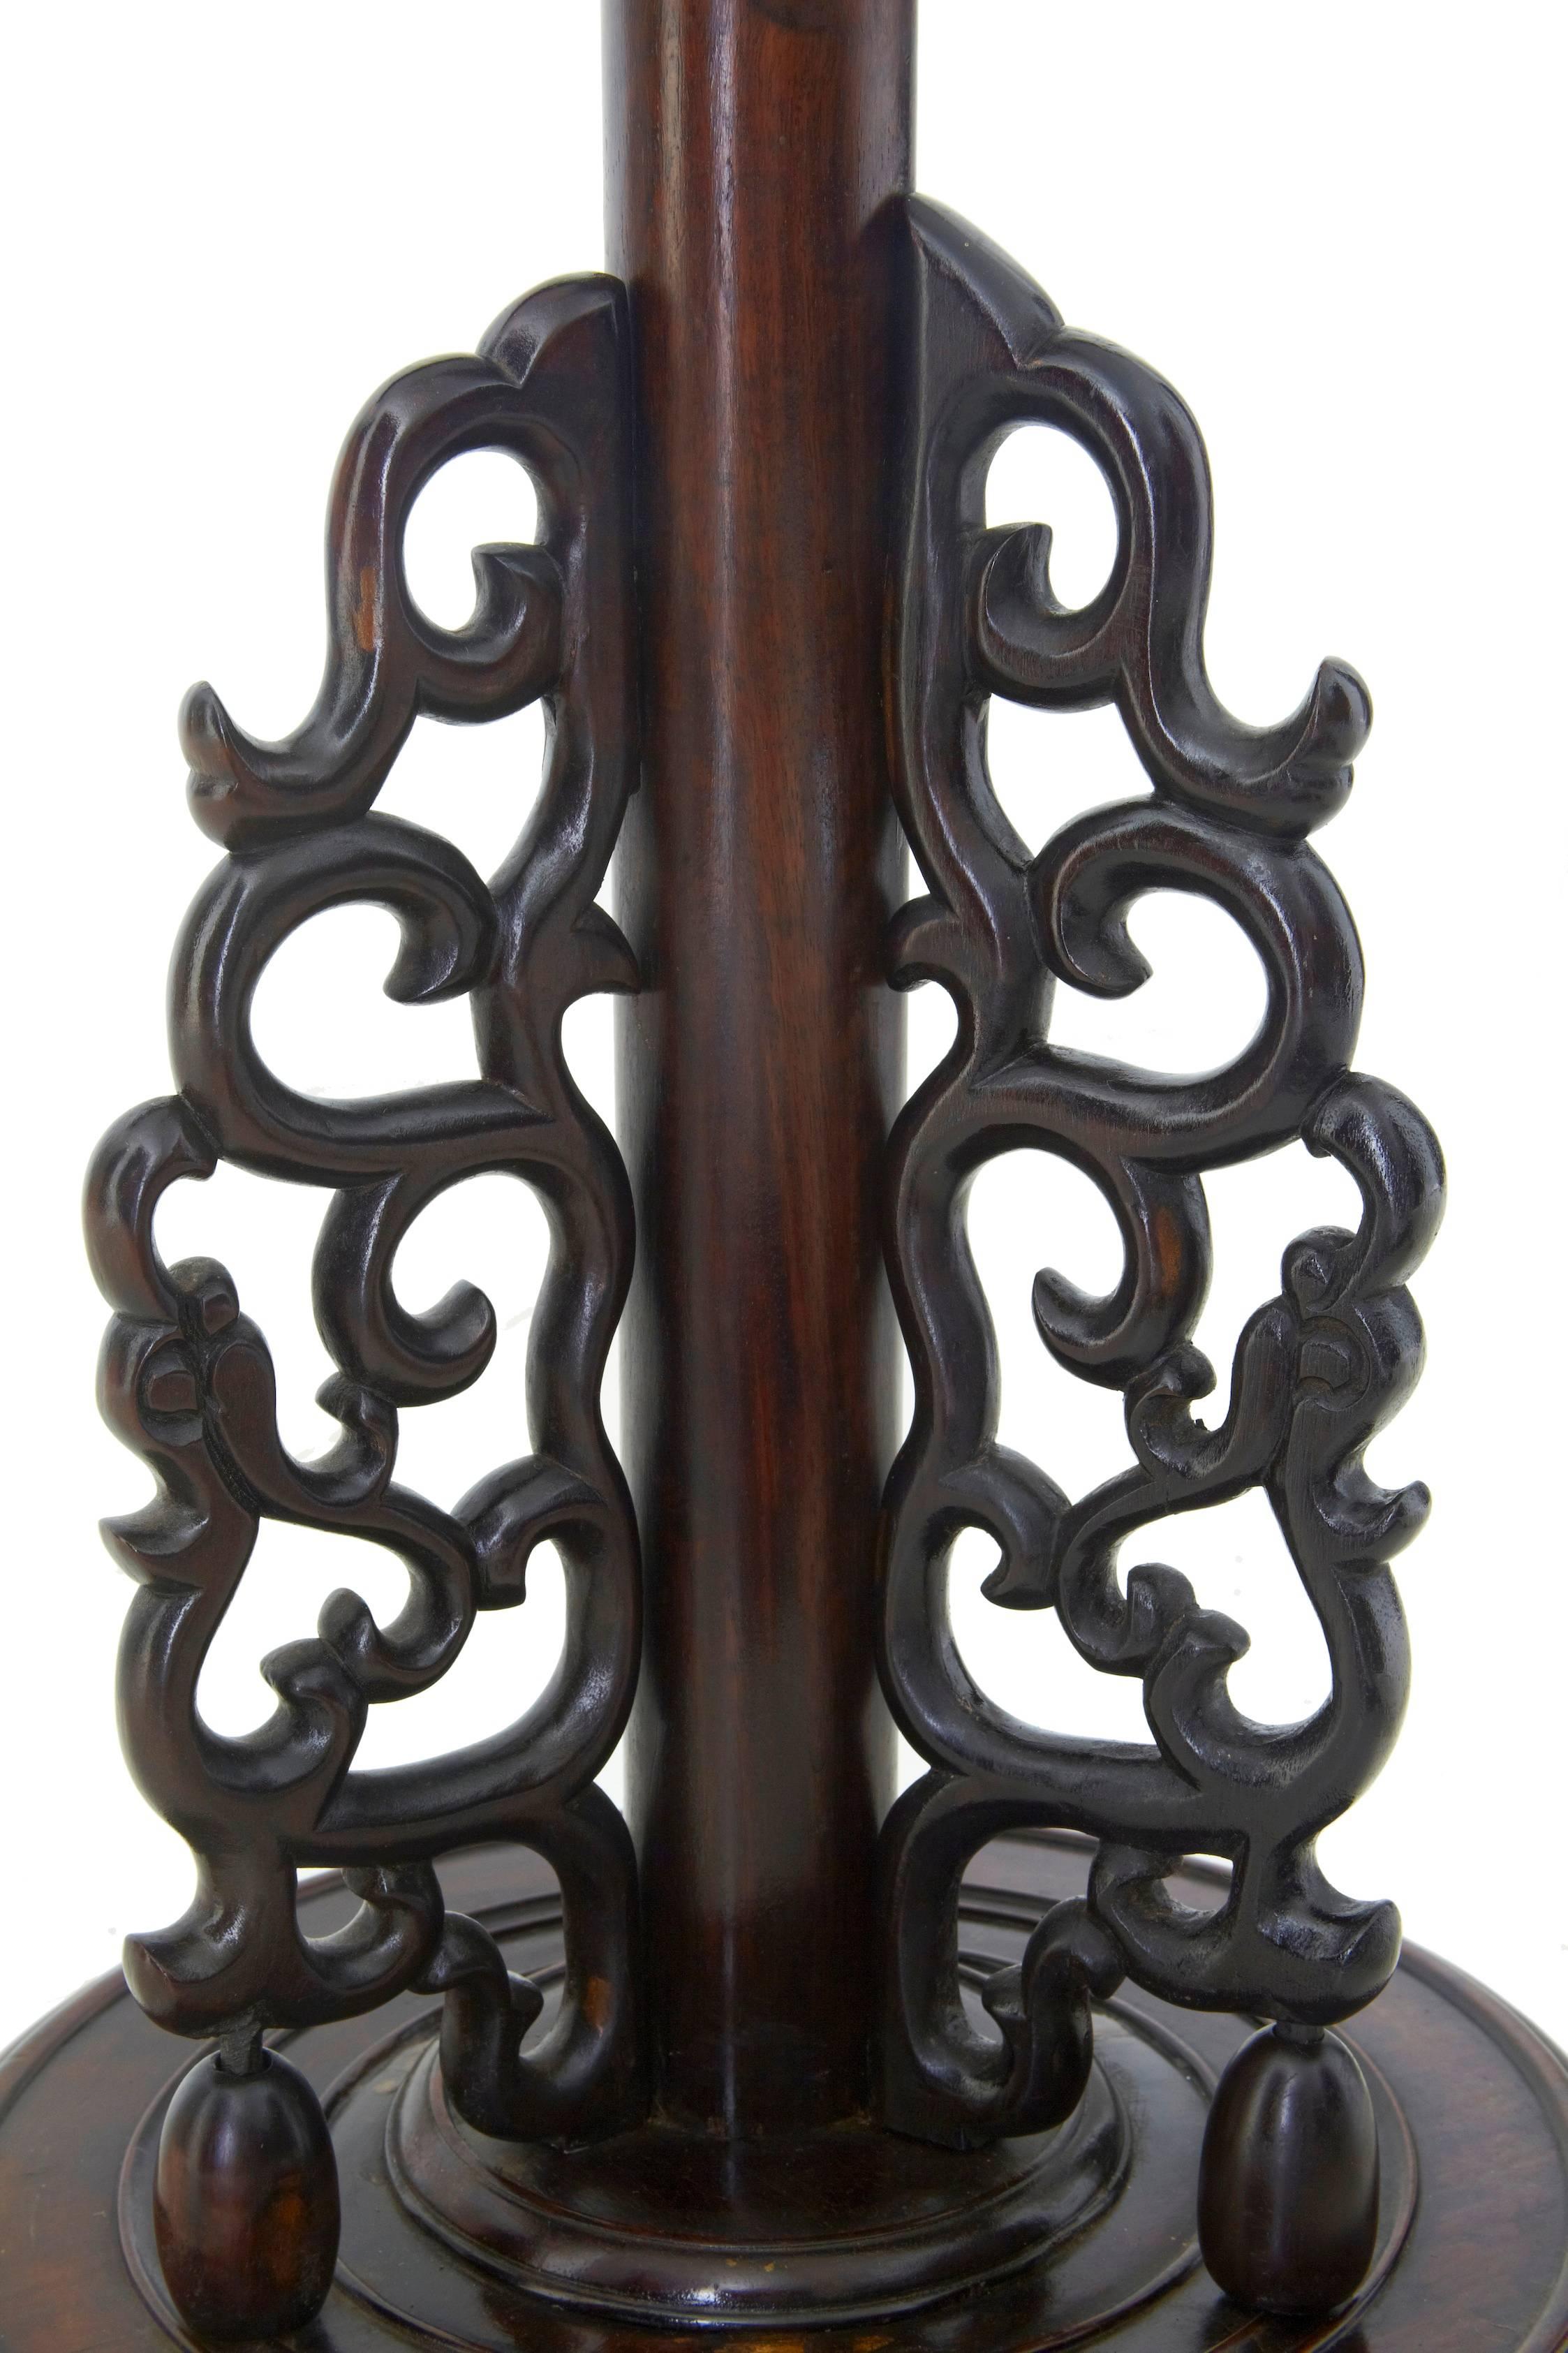 Decorative Chinese Carved Hard Wood Floor Lamp (Chinesisch)